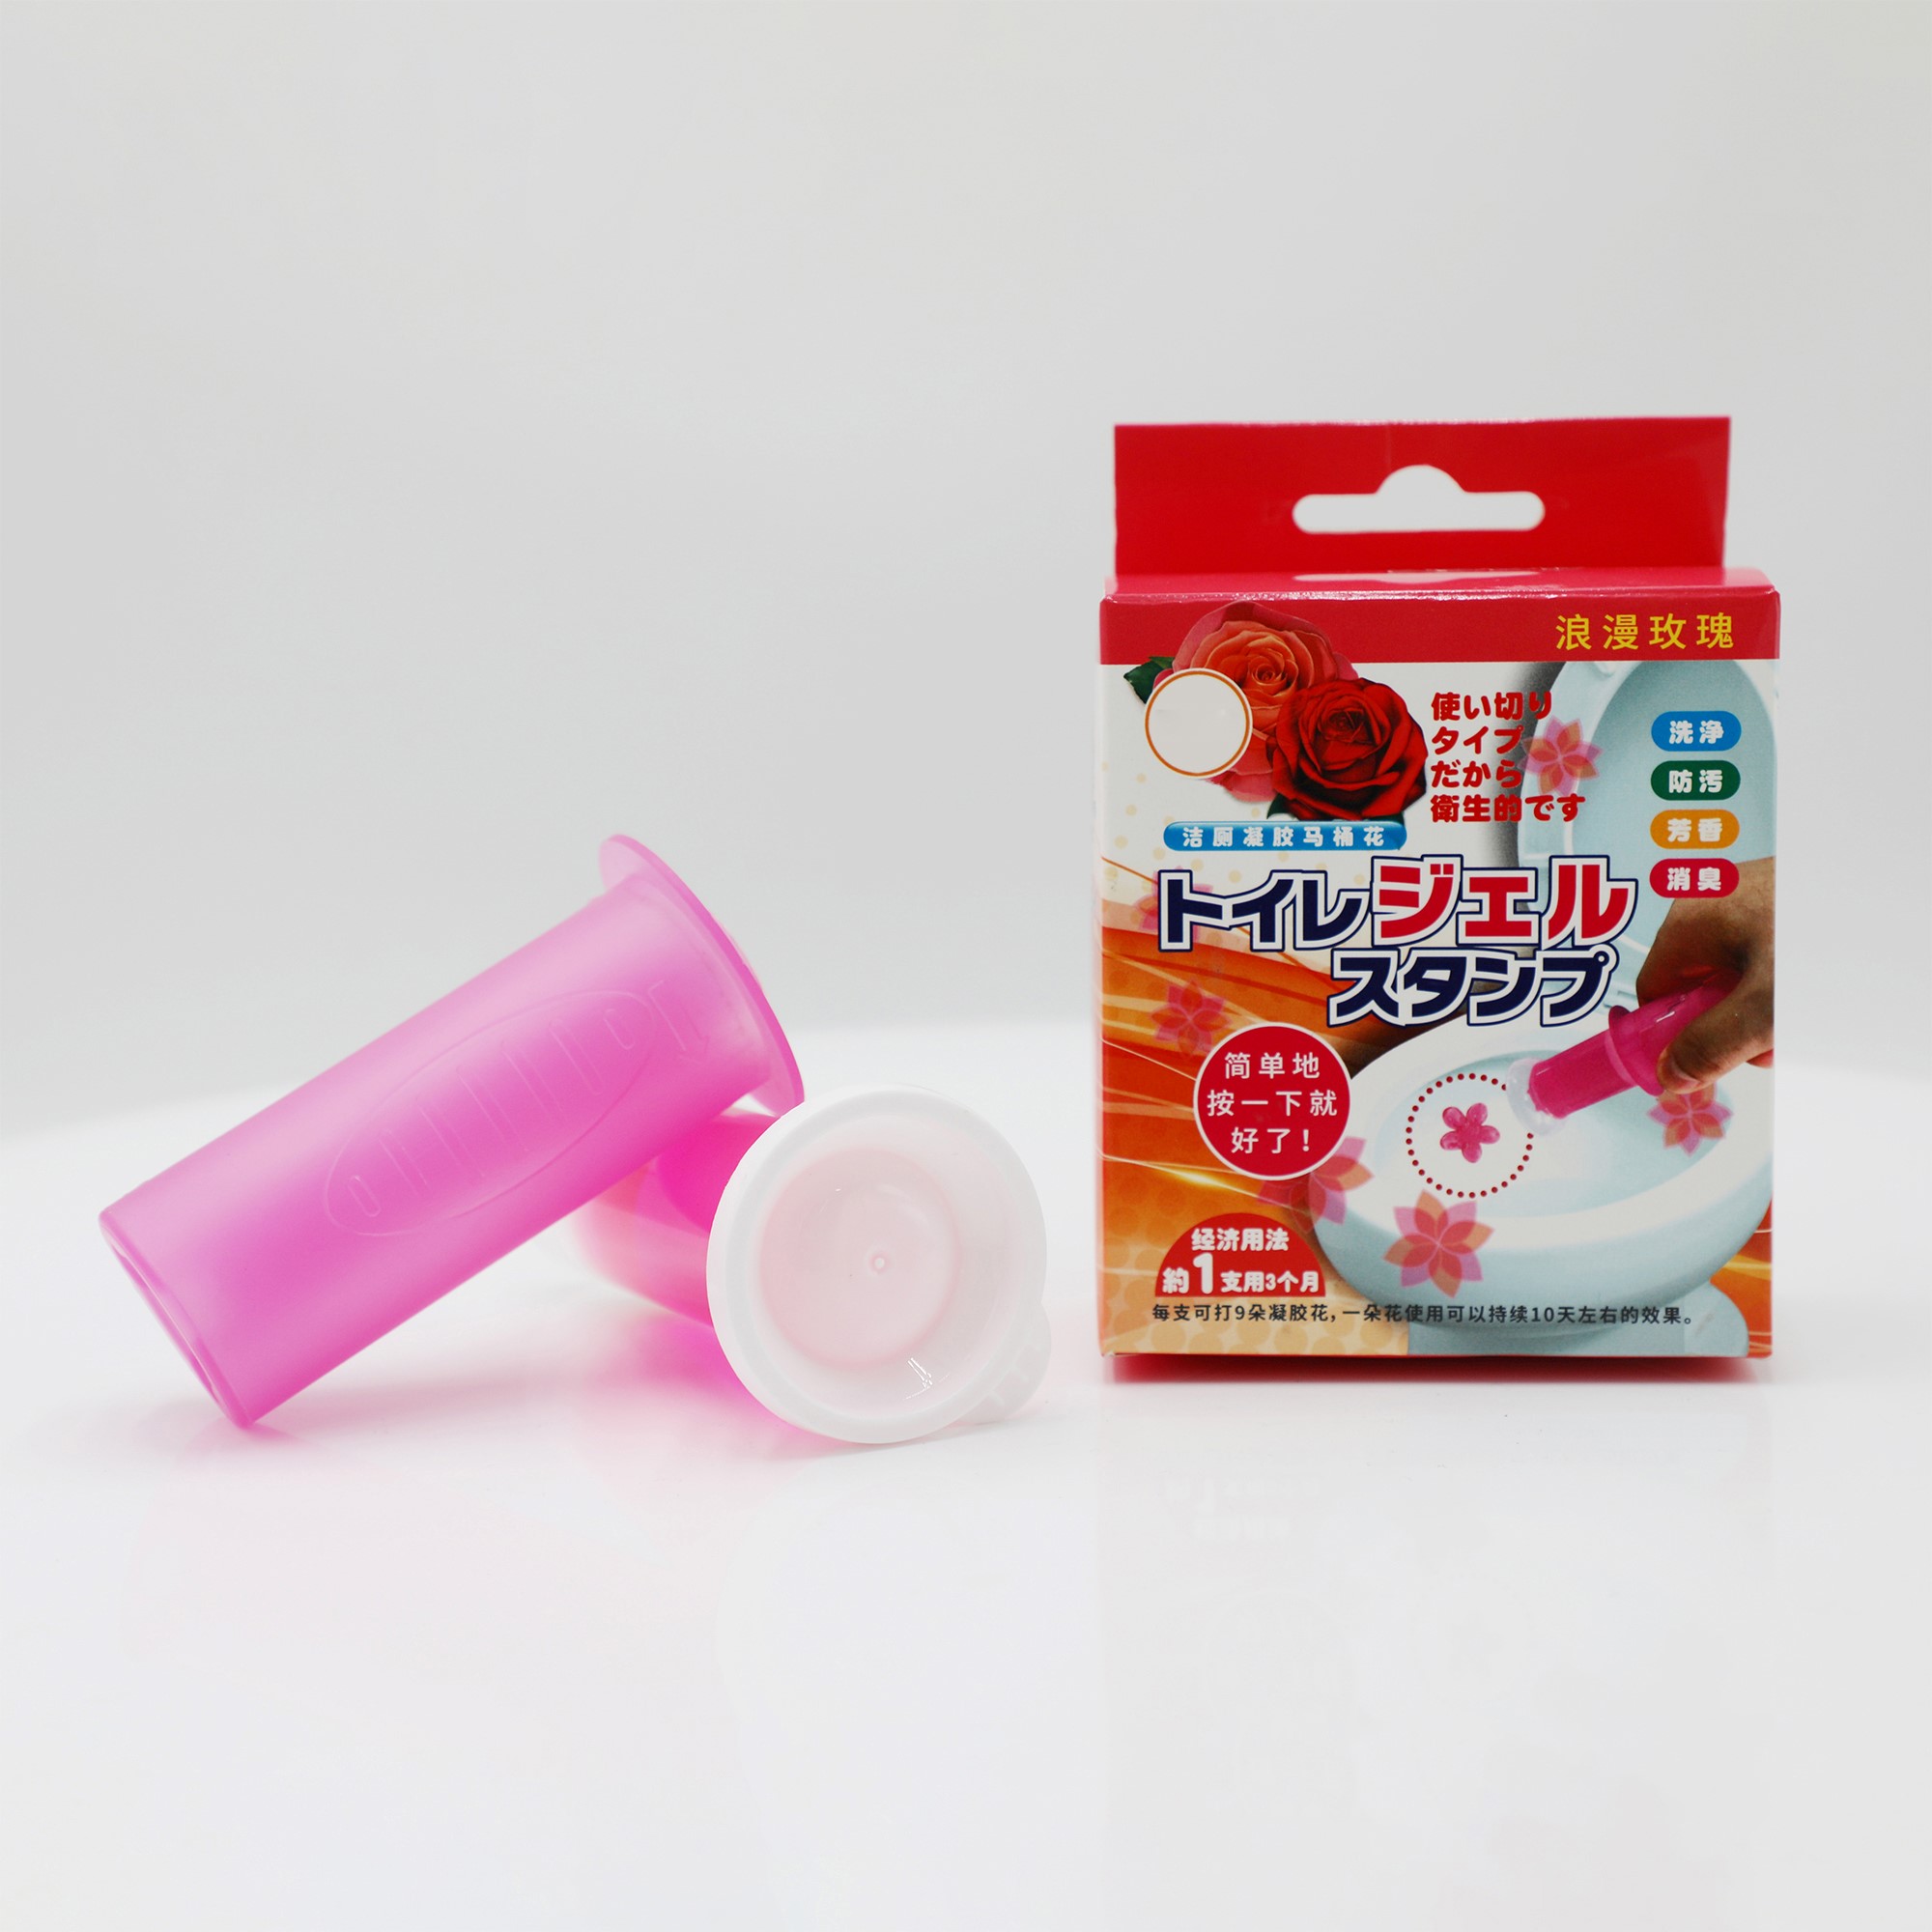 Pink Plastic Toilet Cleaning Dish - Easy and Effective 1*40g